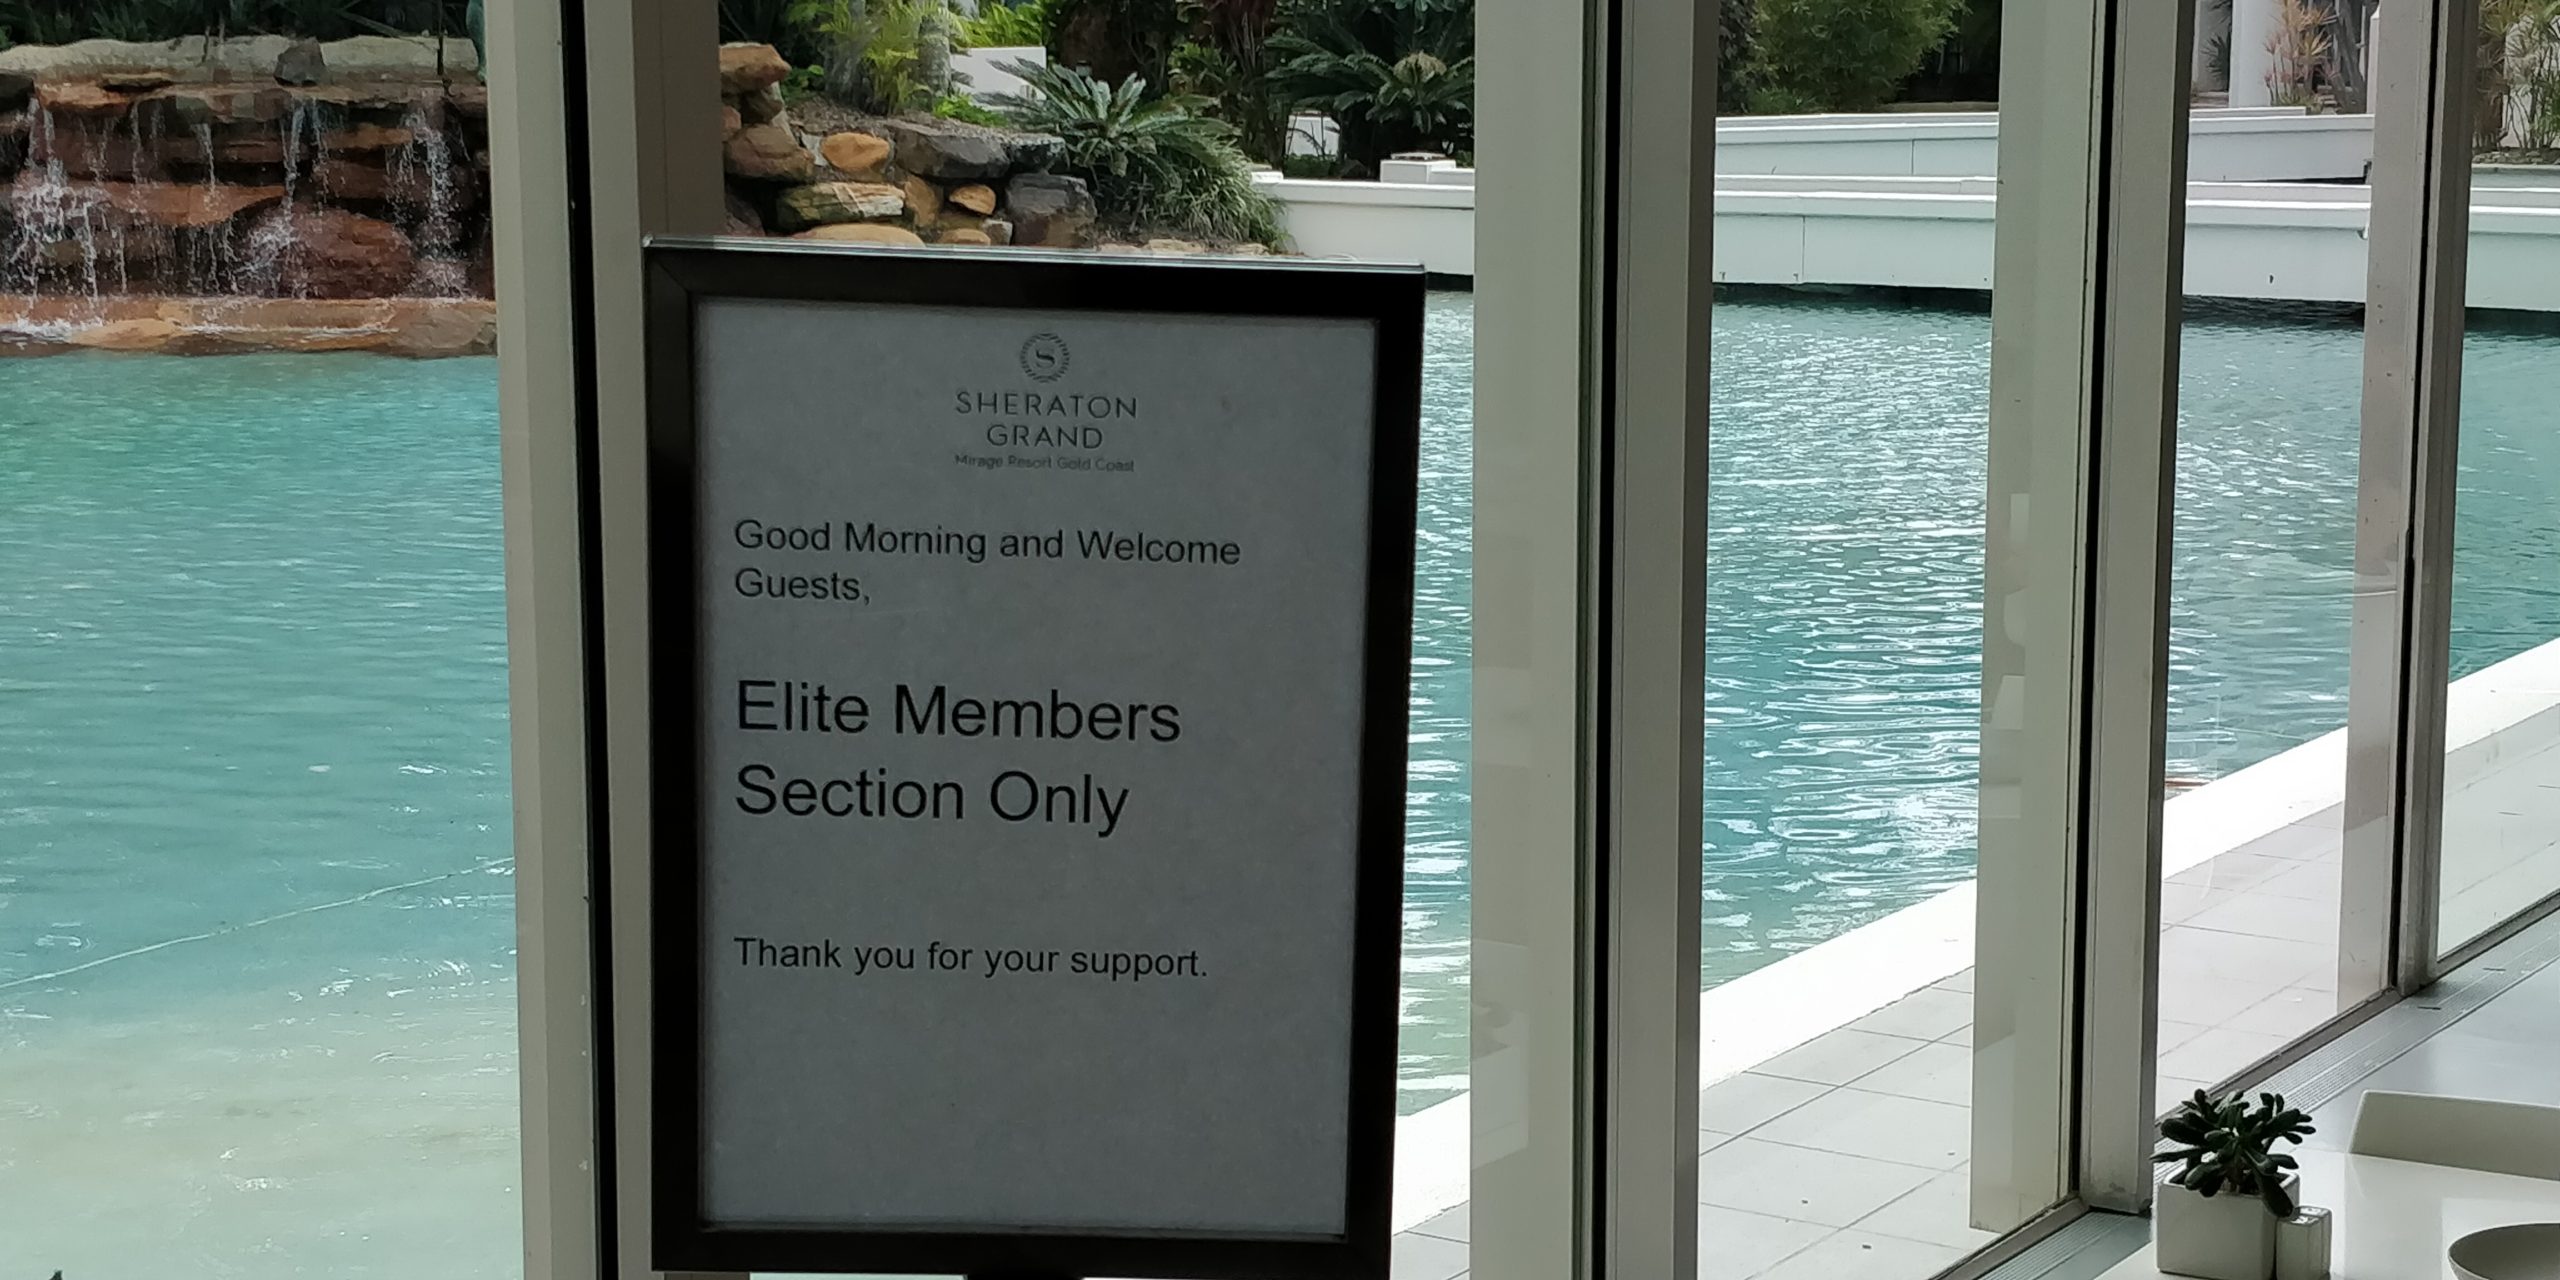 Review the Grand Mirage Resort
The sign welcoming Elite member's to a special private section for breakfast